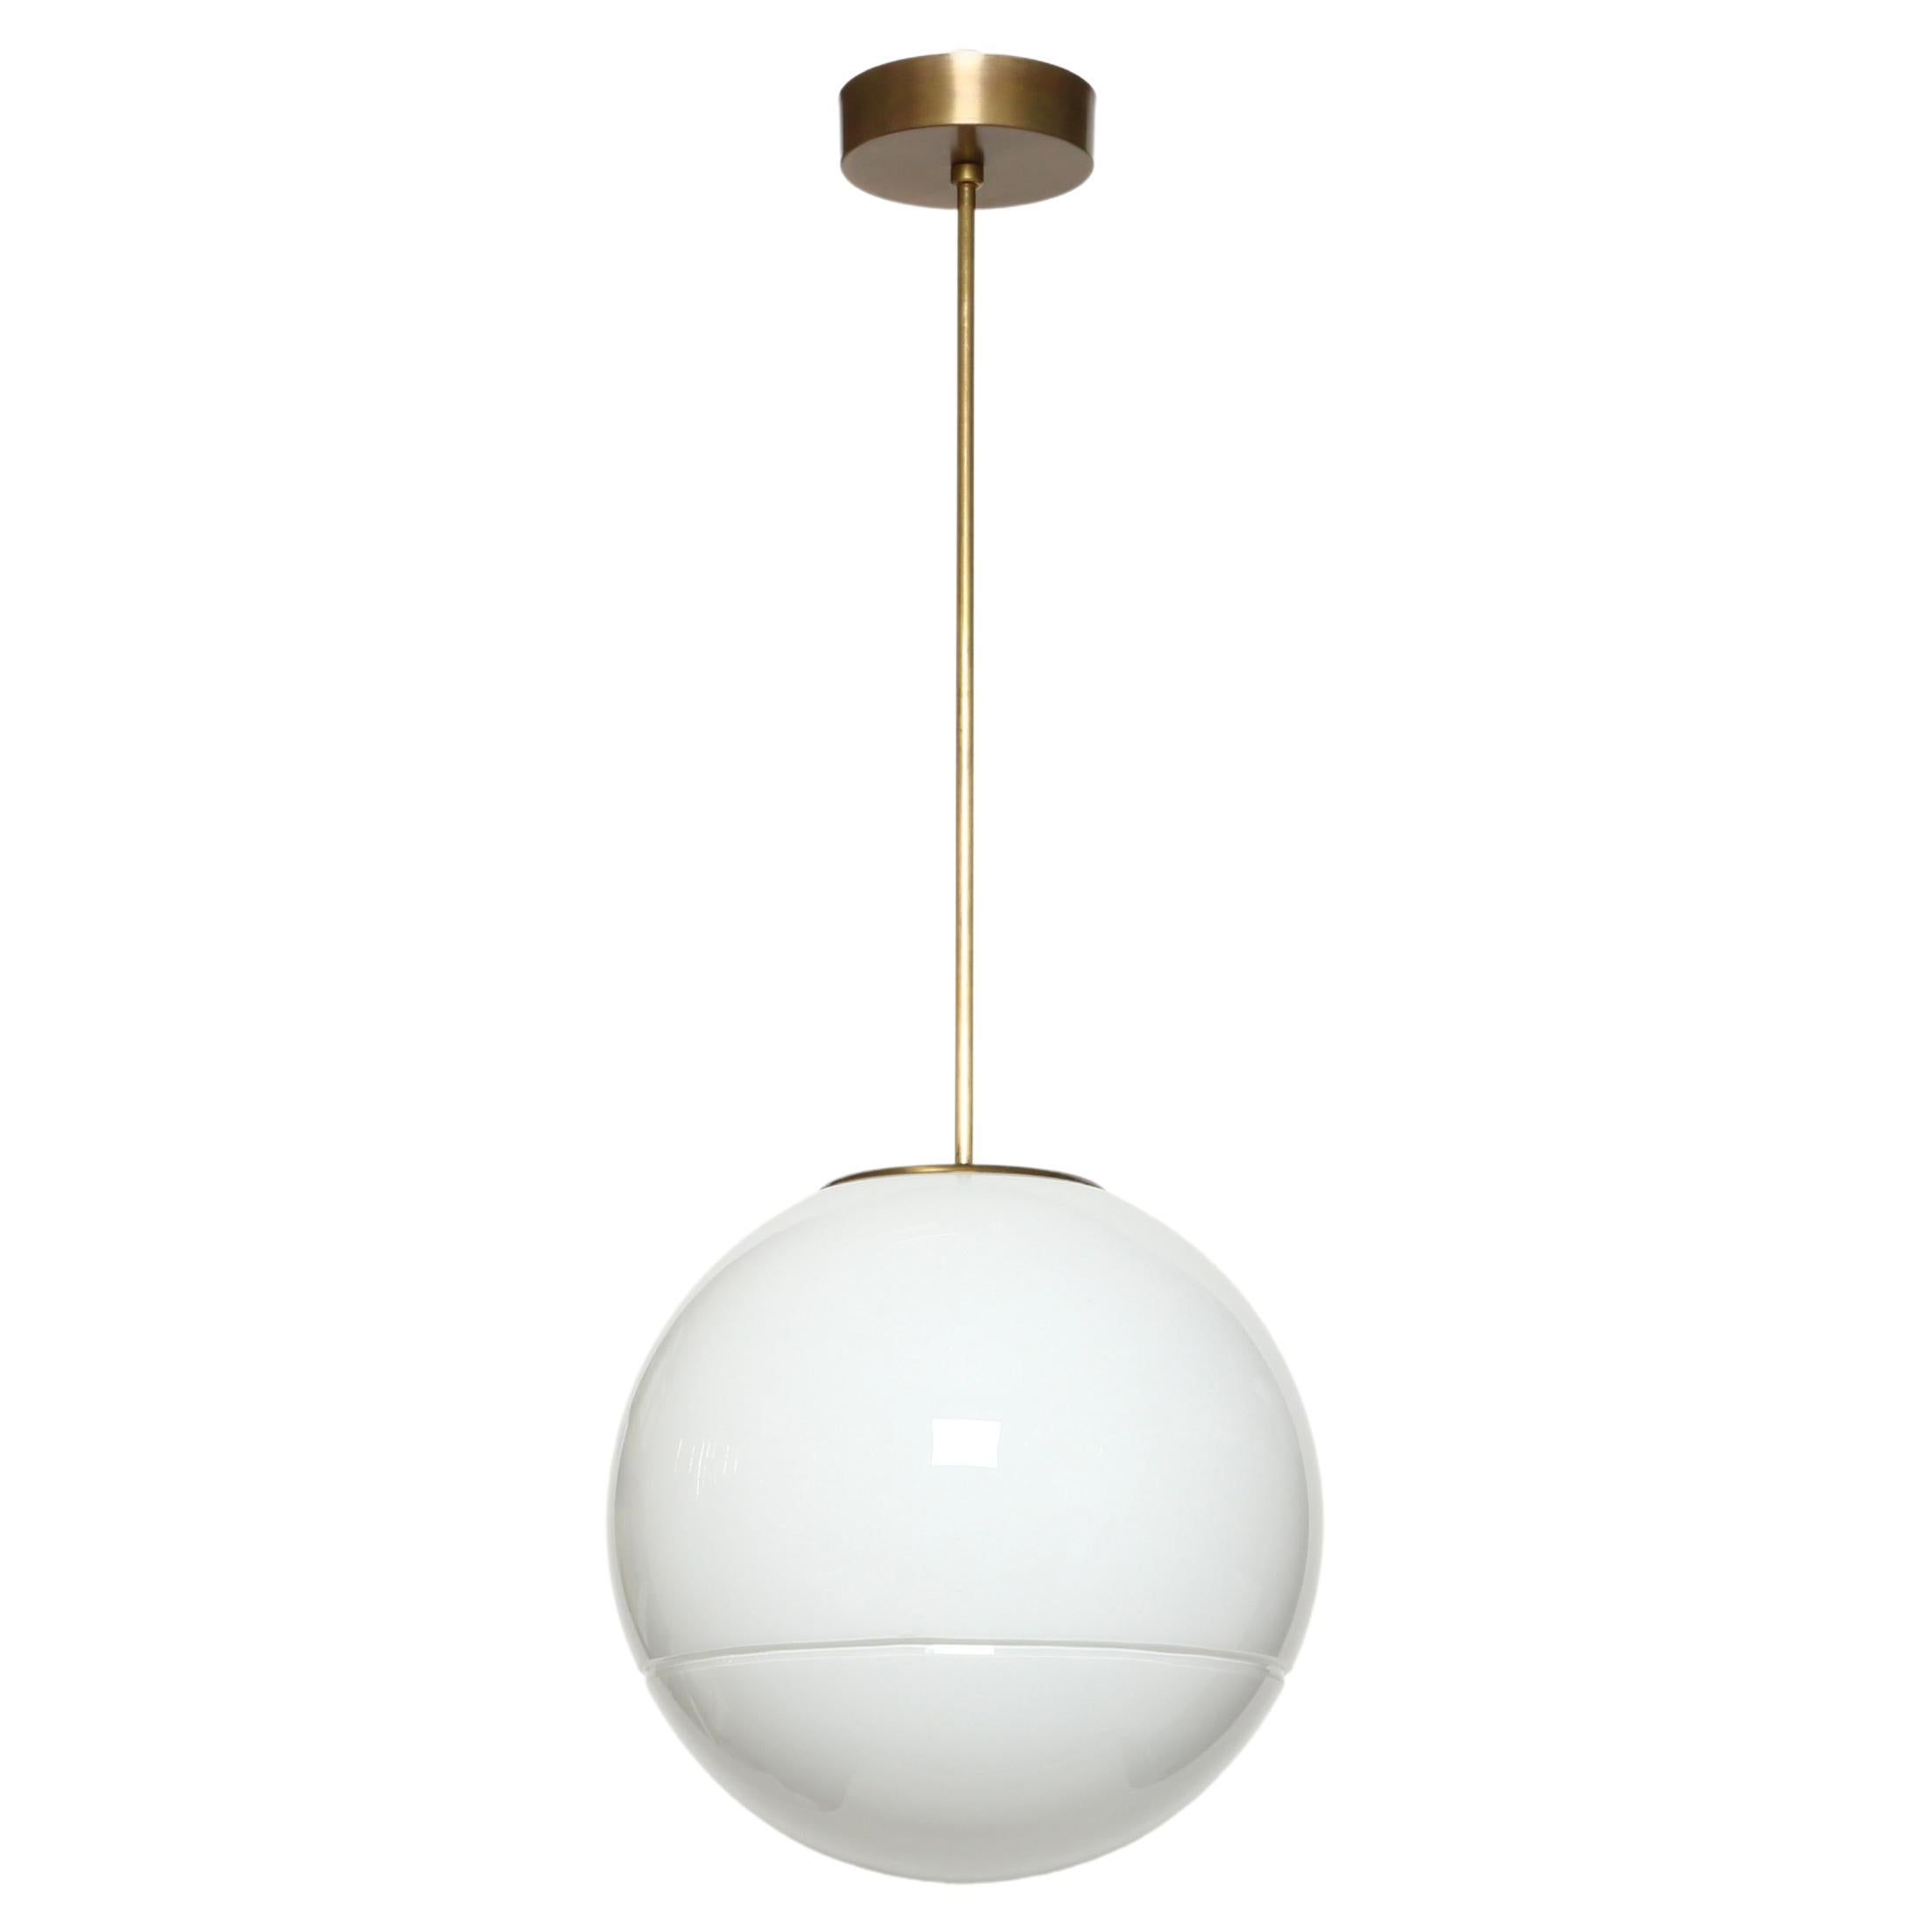 Murano glass ceiling pendant by Roberto Pamio for Leucos, attributed